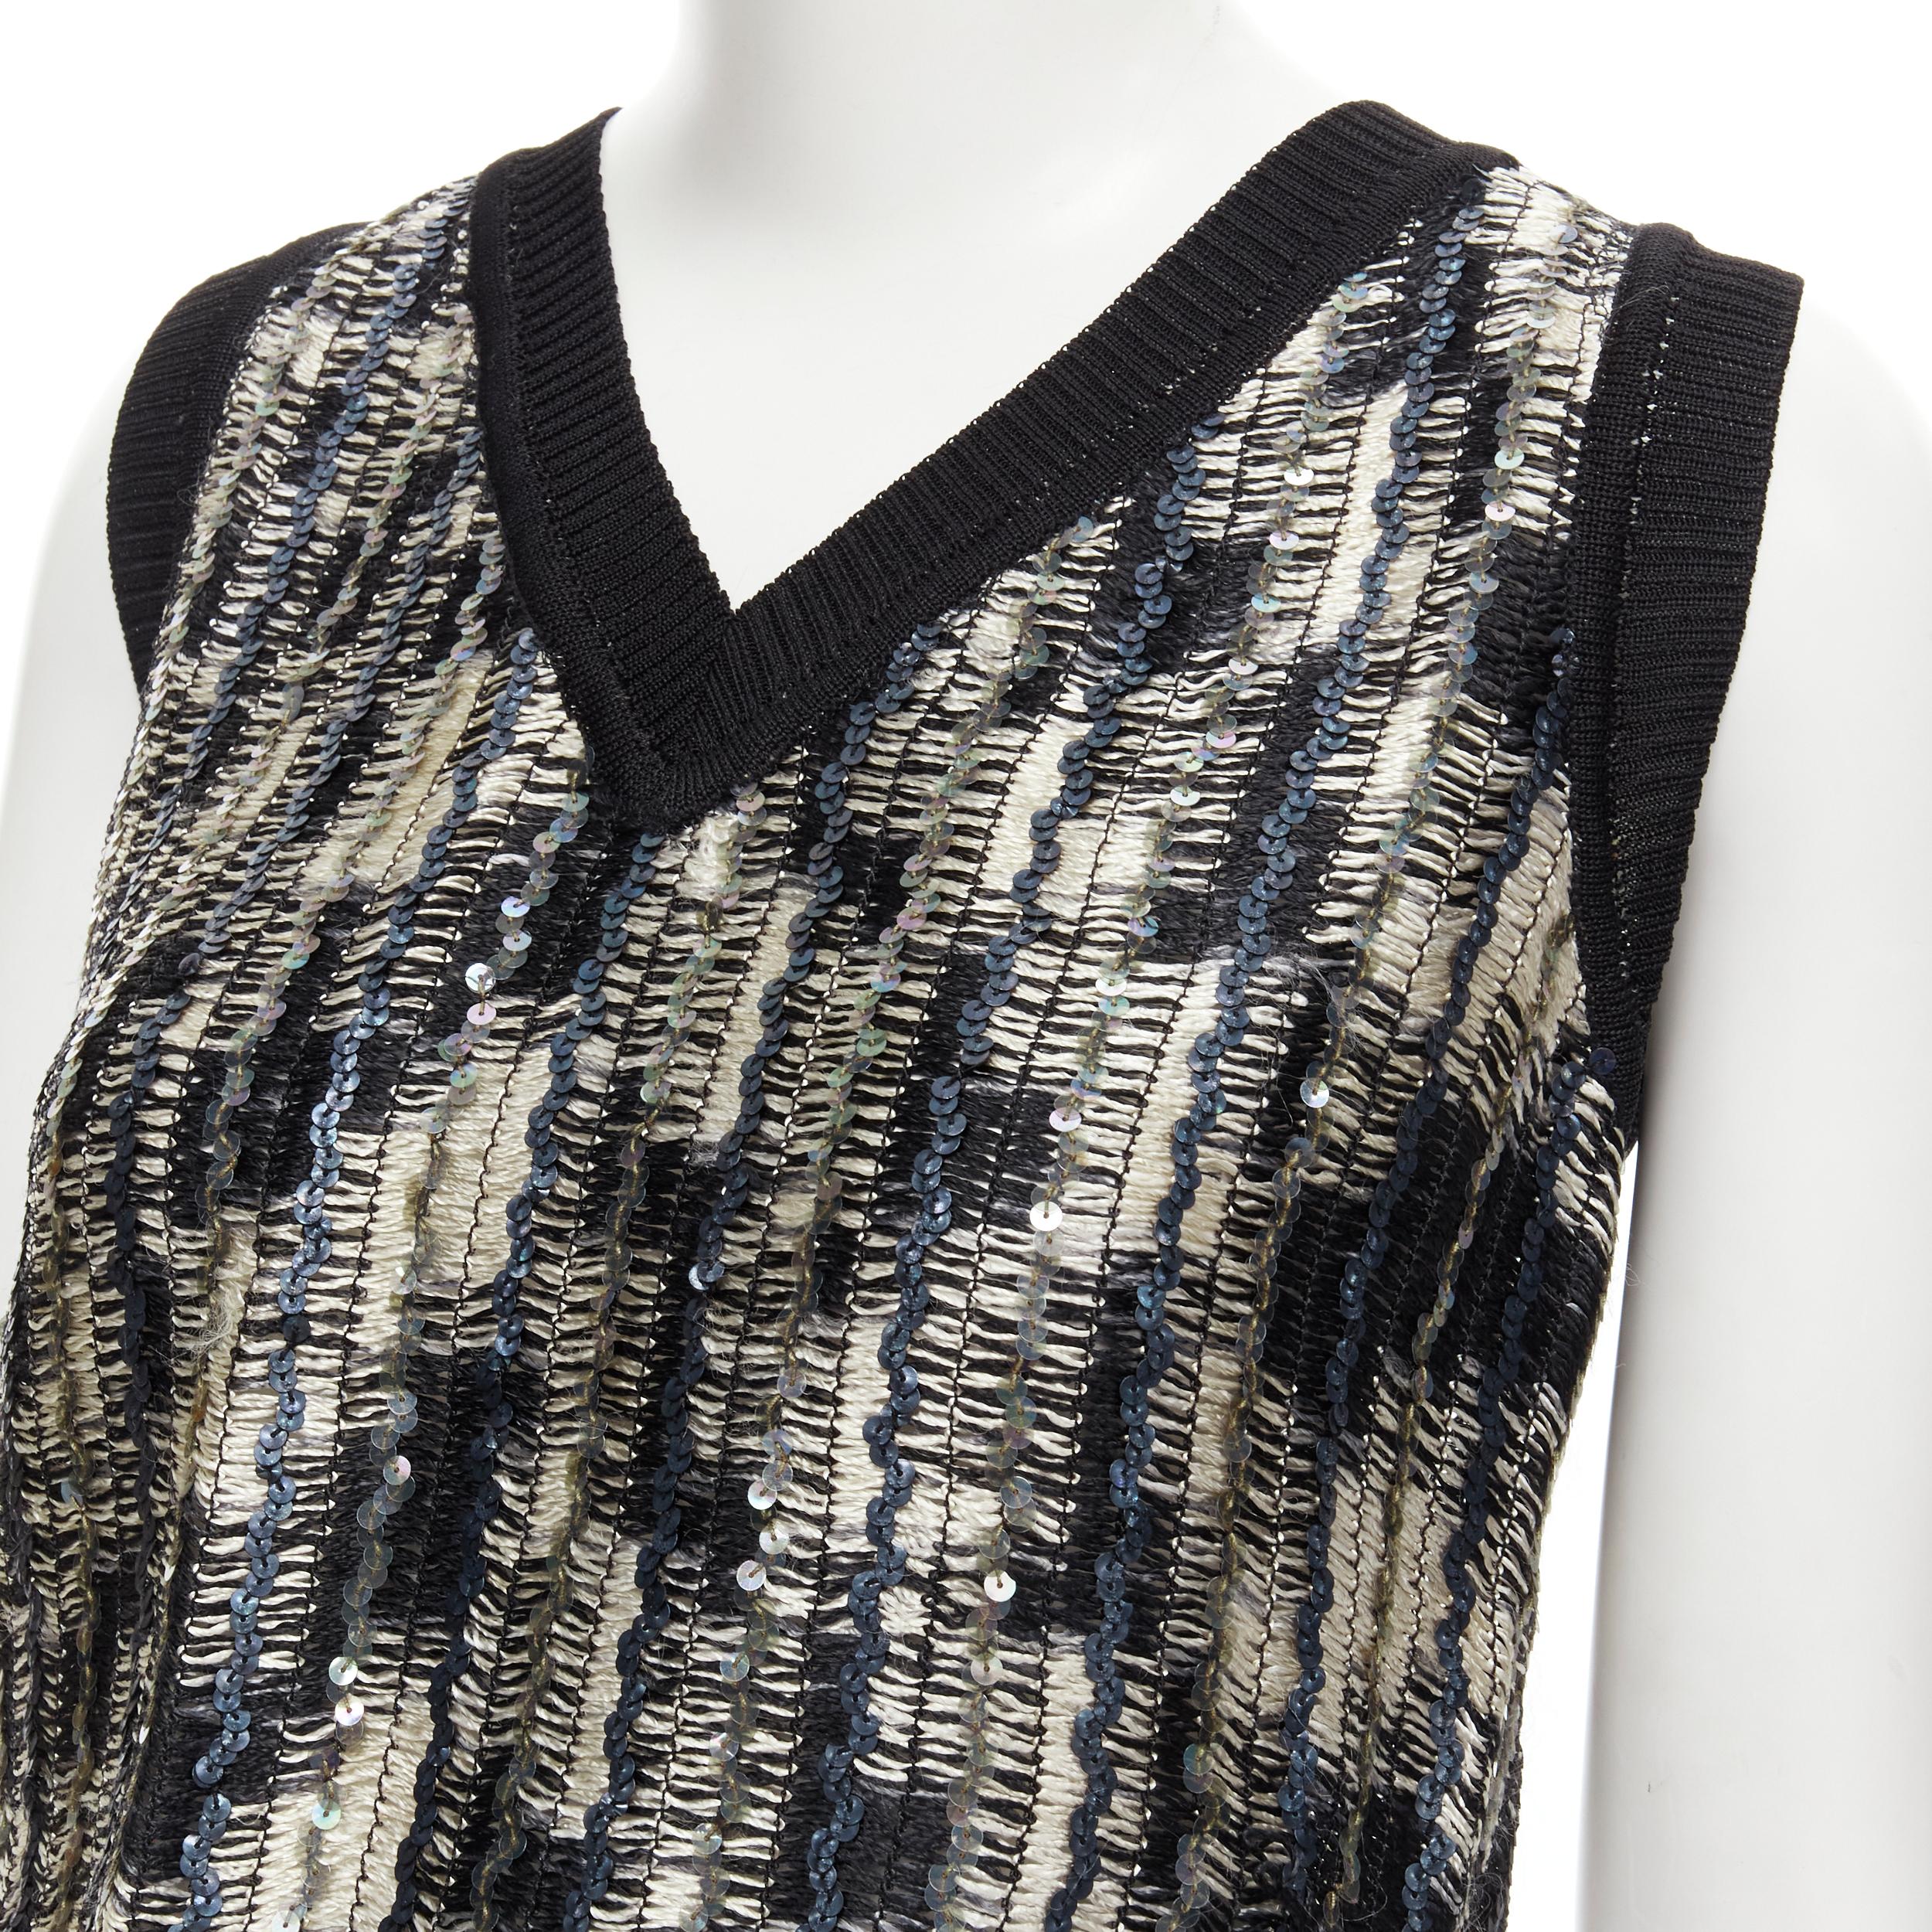 MISSONI blue silver sequins embellished crochet knit cropped vest IT42 M
Reference: GIYG/A00201 
Brand: Missoni 
Material: Rayon 
Color: Grey 
Pattern: Abstract 
Made in: Italy 

CONDITION: 
Condition: Excellent, this item was pre-owned and is in